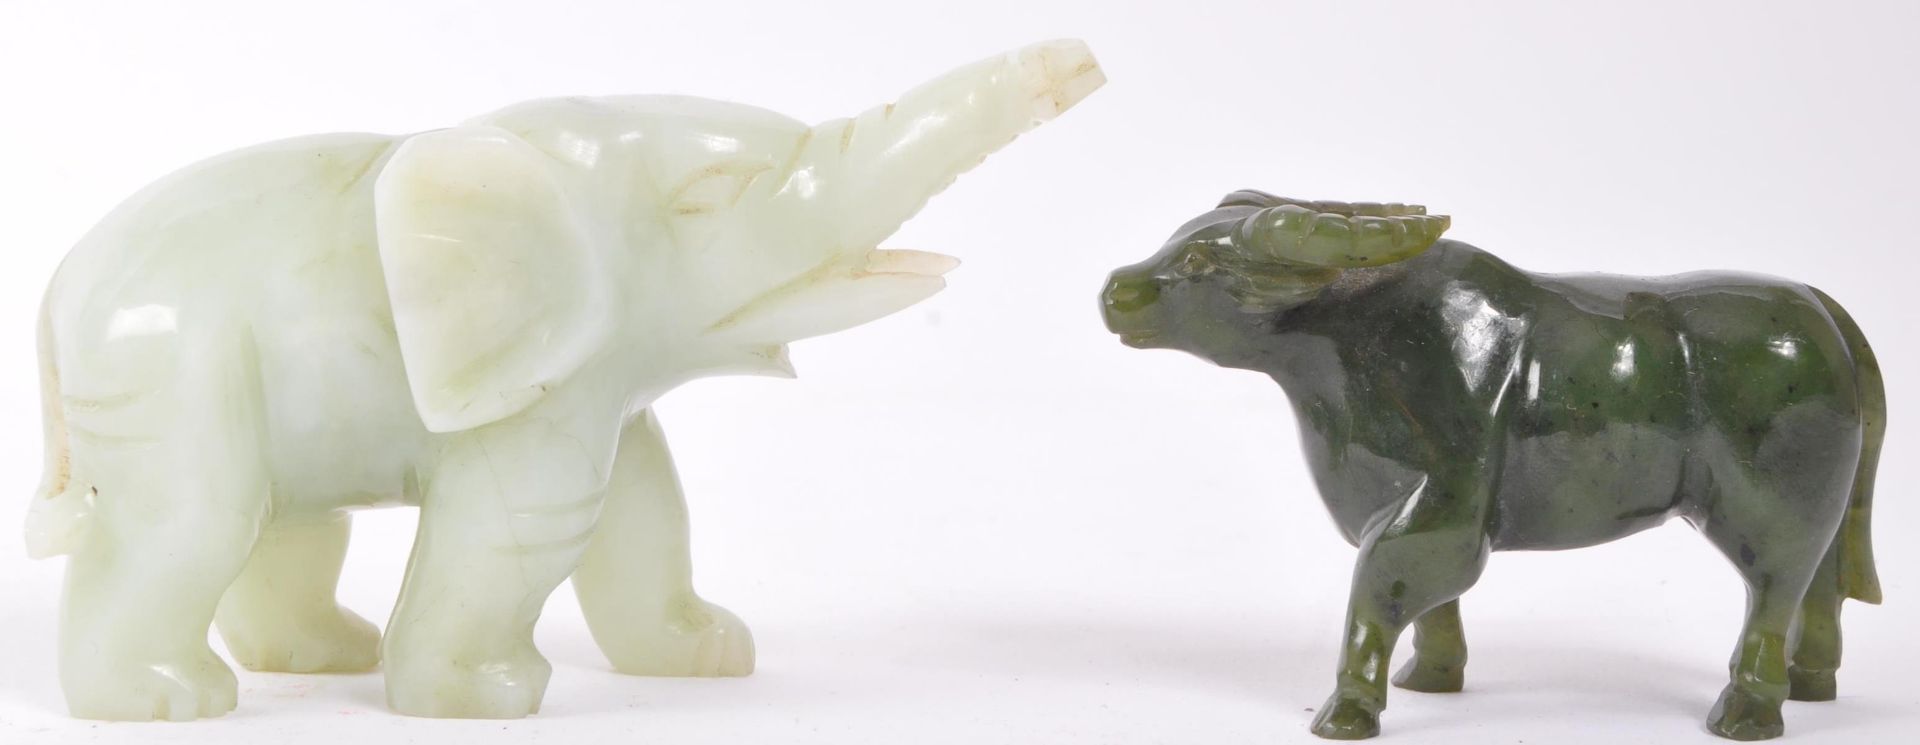 TWO 20TH CENTURY CHINESE FIGURES - NEPHRITE JADE